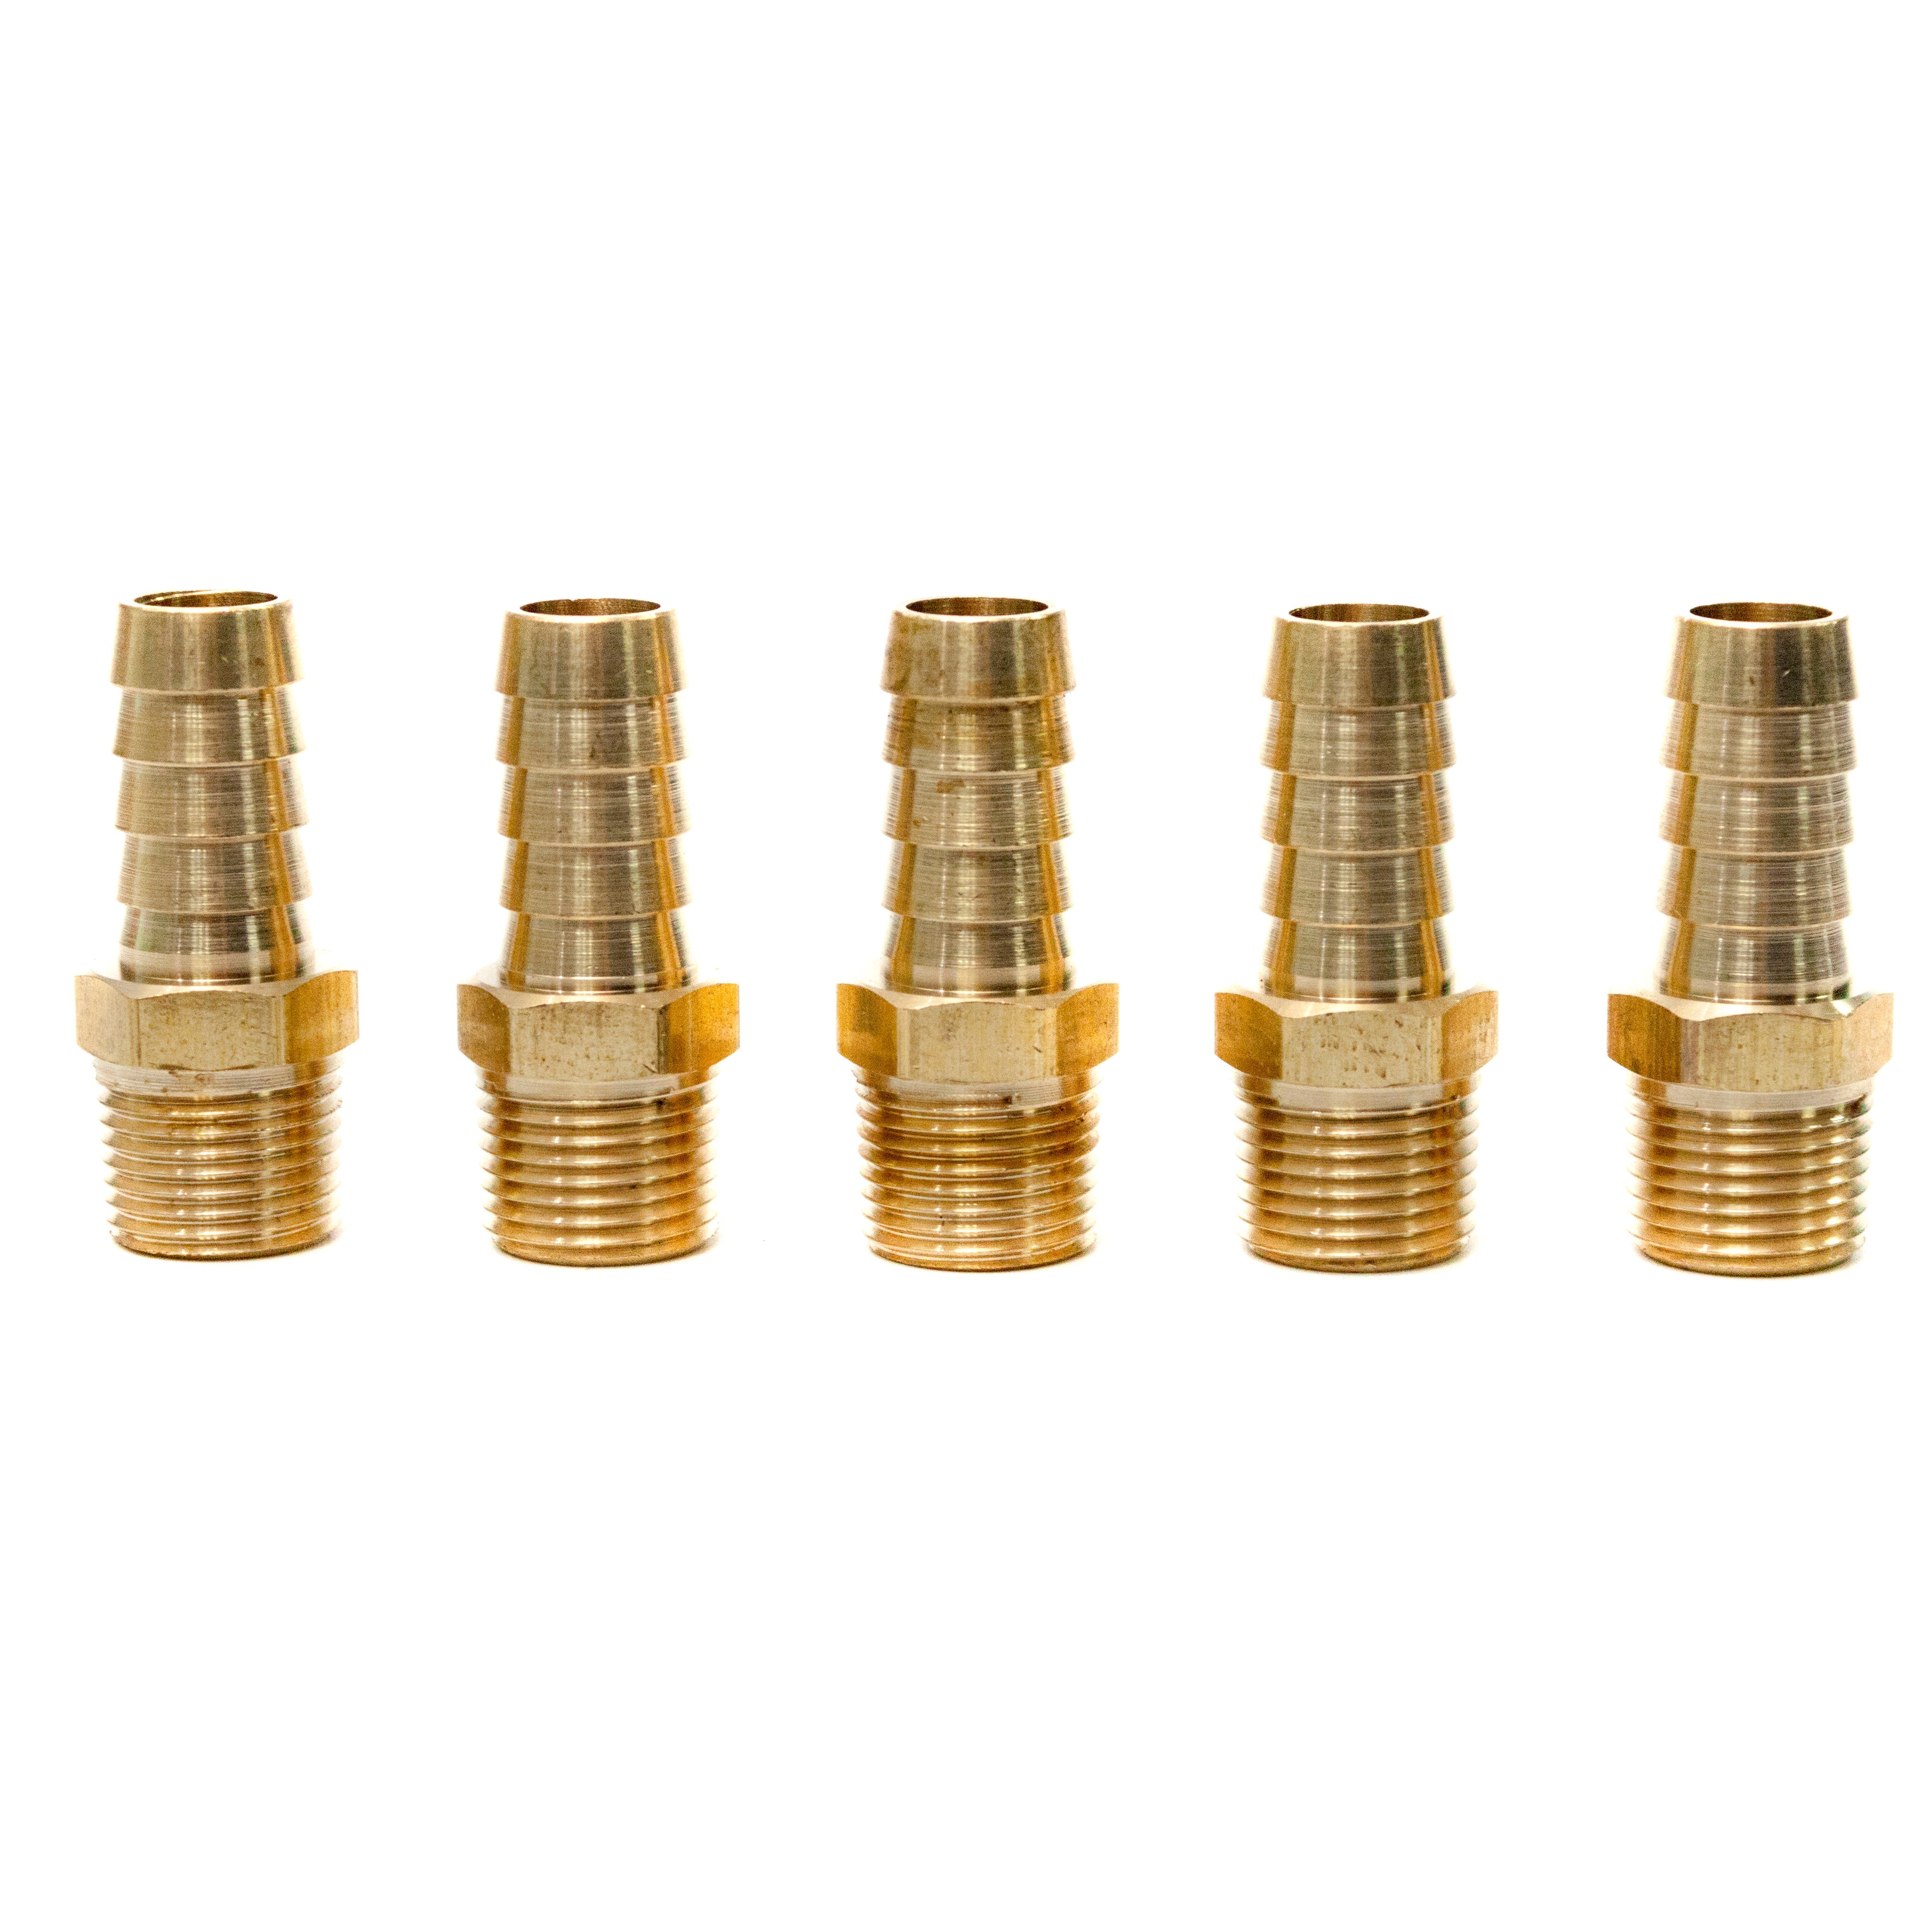 LTWFITTING Lead Free Brass Barbed Fitting Coupler/Connector 1/2 Inch Hose Barb x 3/8 Inch Male NPT Fuel Gas Water (Pack of 5)